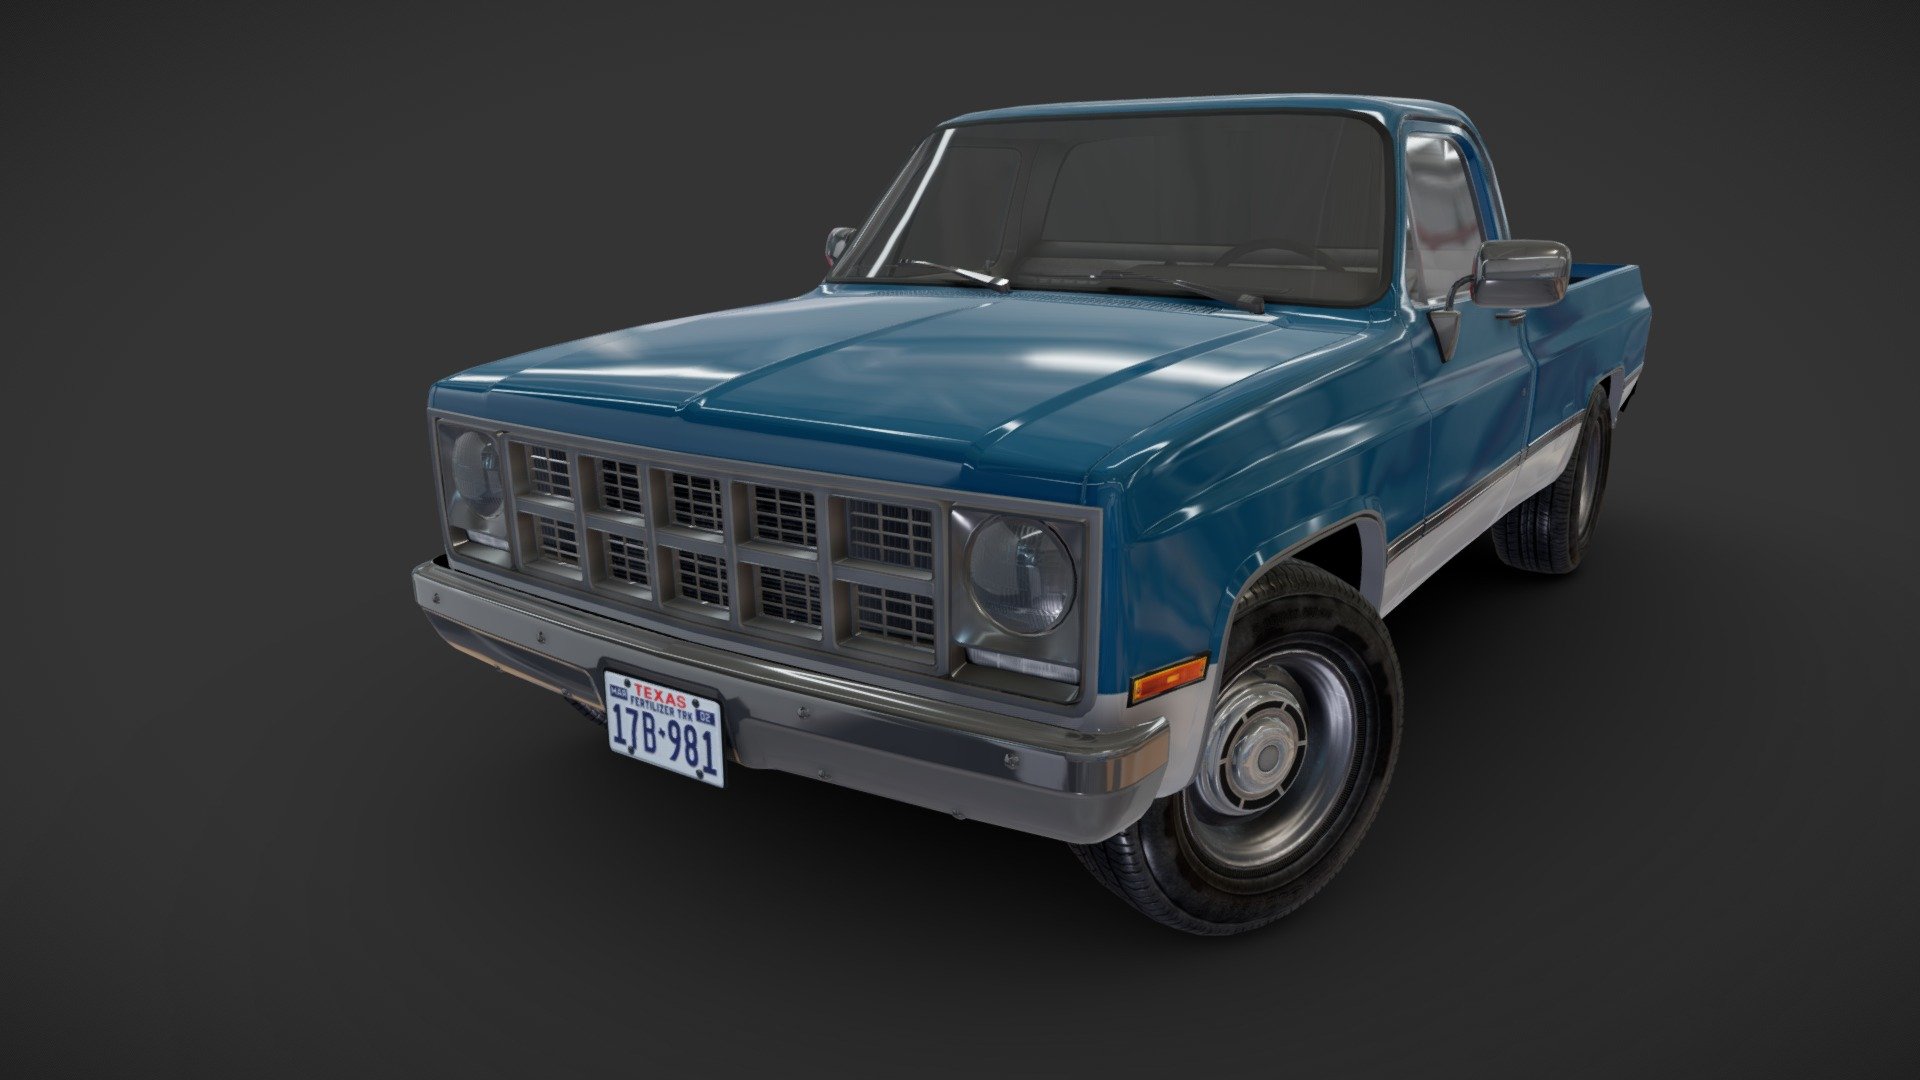 High accuracy pickup model. Clean topology. Low poly interior with diffuse map ( 1024x1024). Midpoly body with UV. Lowpoly wheels with PBR maps(Base_Color/Metallic/Normal/Roughness.png ). Lenght 4,891m , width 1,785m , height 1,607m. Wheels - 9000. tris Interior - 2 900 tris. Model - 43430 tris. Model ready for real-time apps, games, virtual reality and augmented reality 3d model